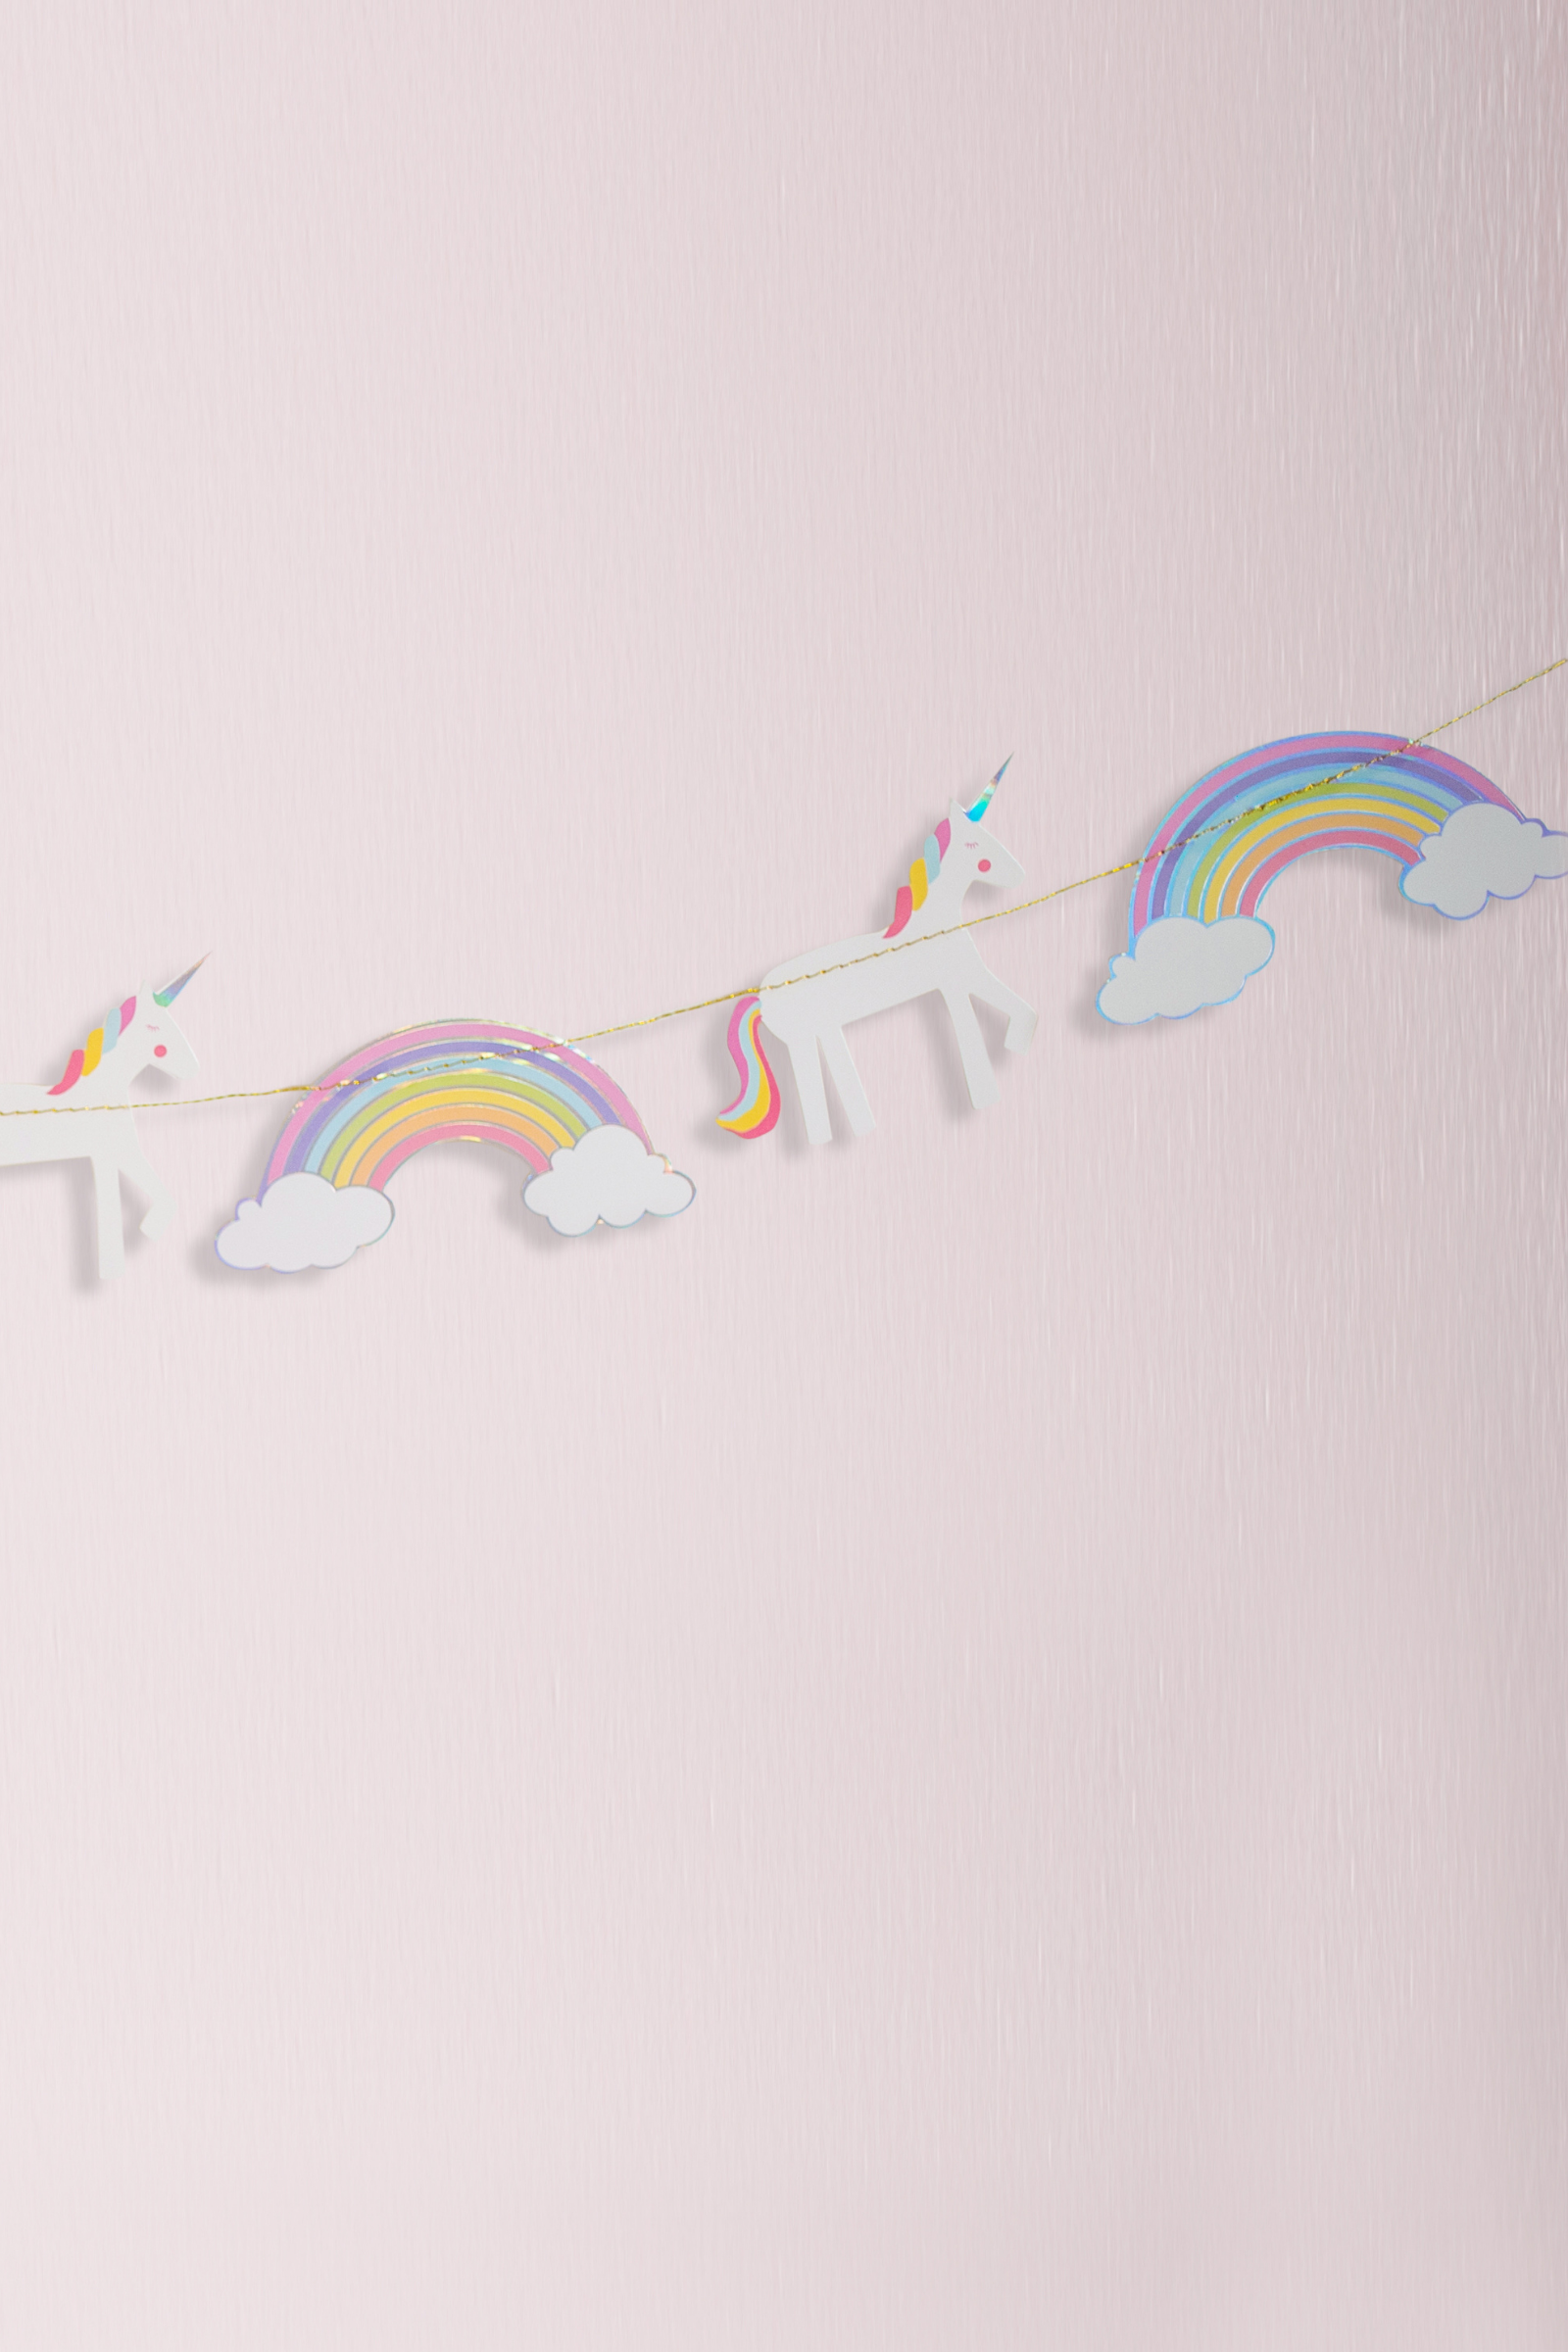 Garlands - Party - Unicorn with Rainbows